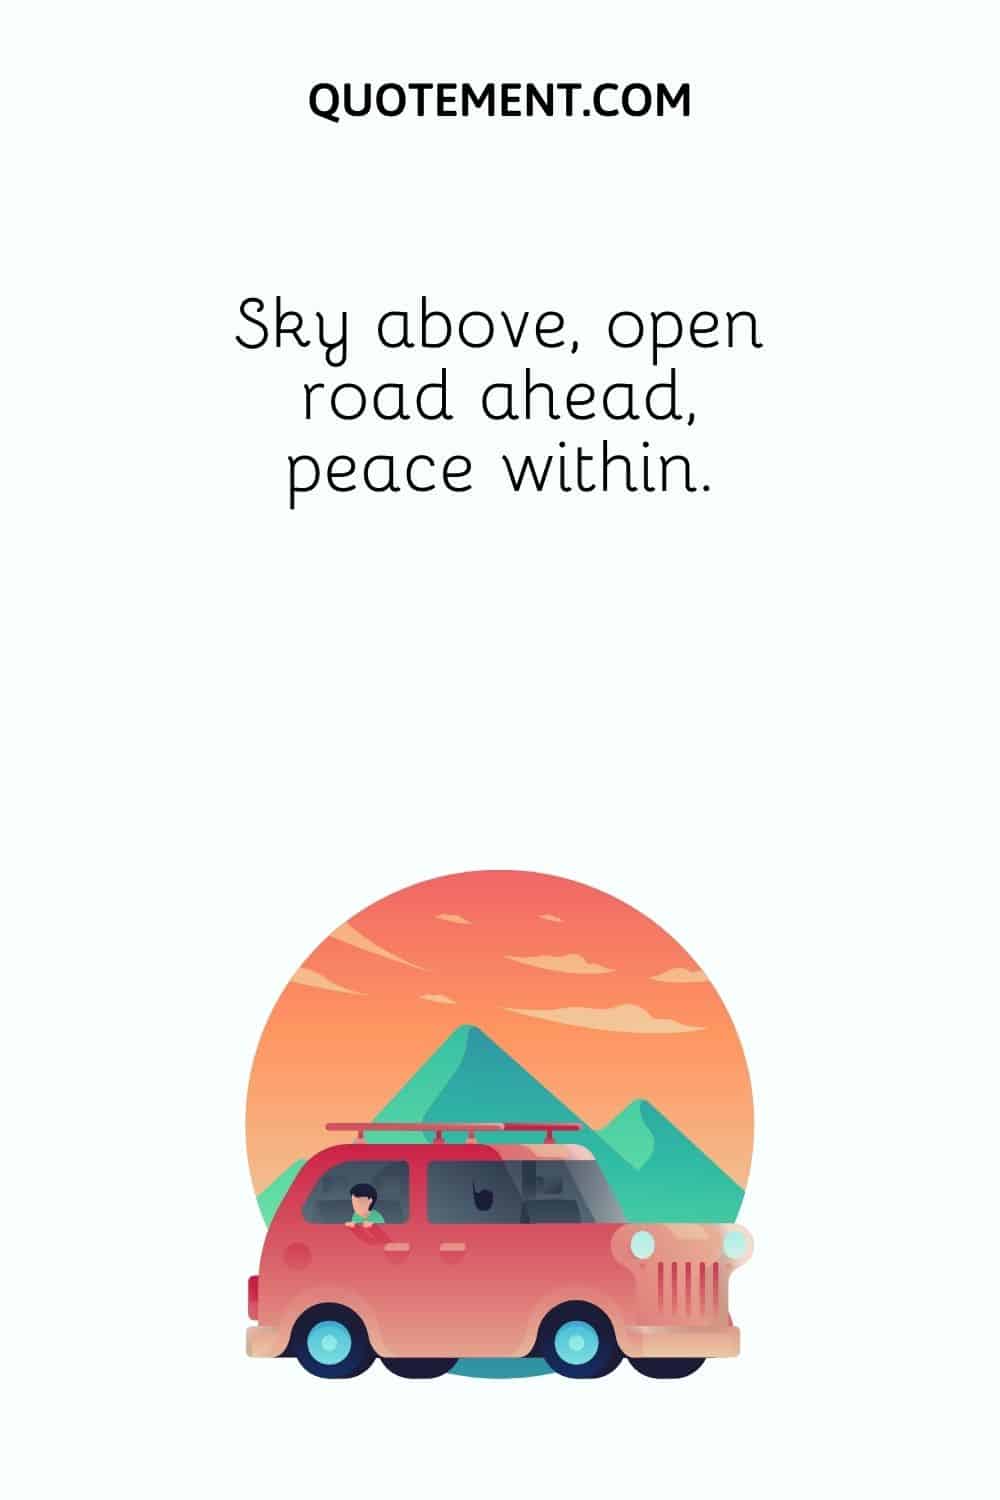 Sky above, open road ahead, peace within